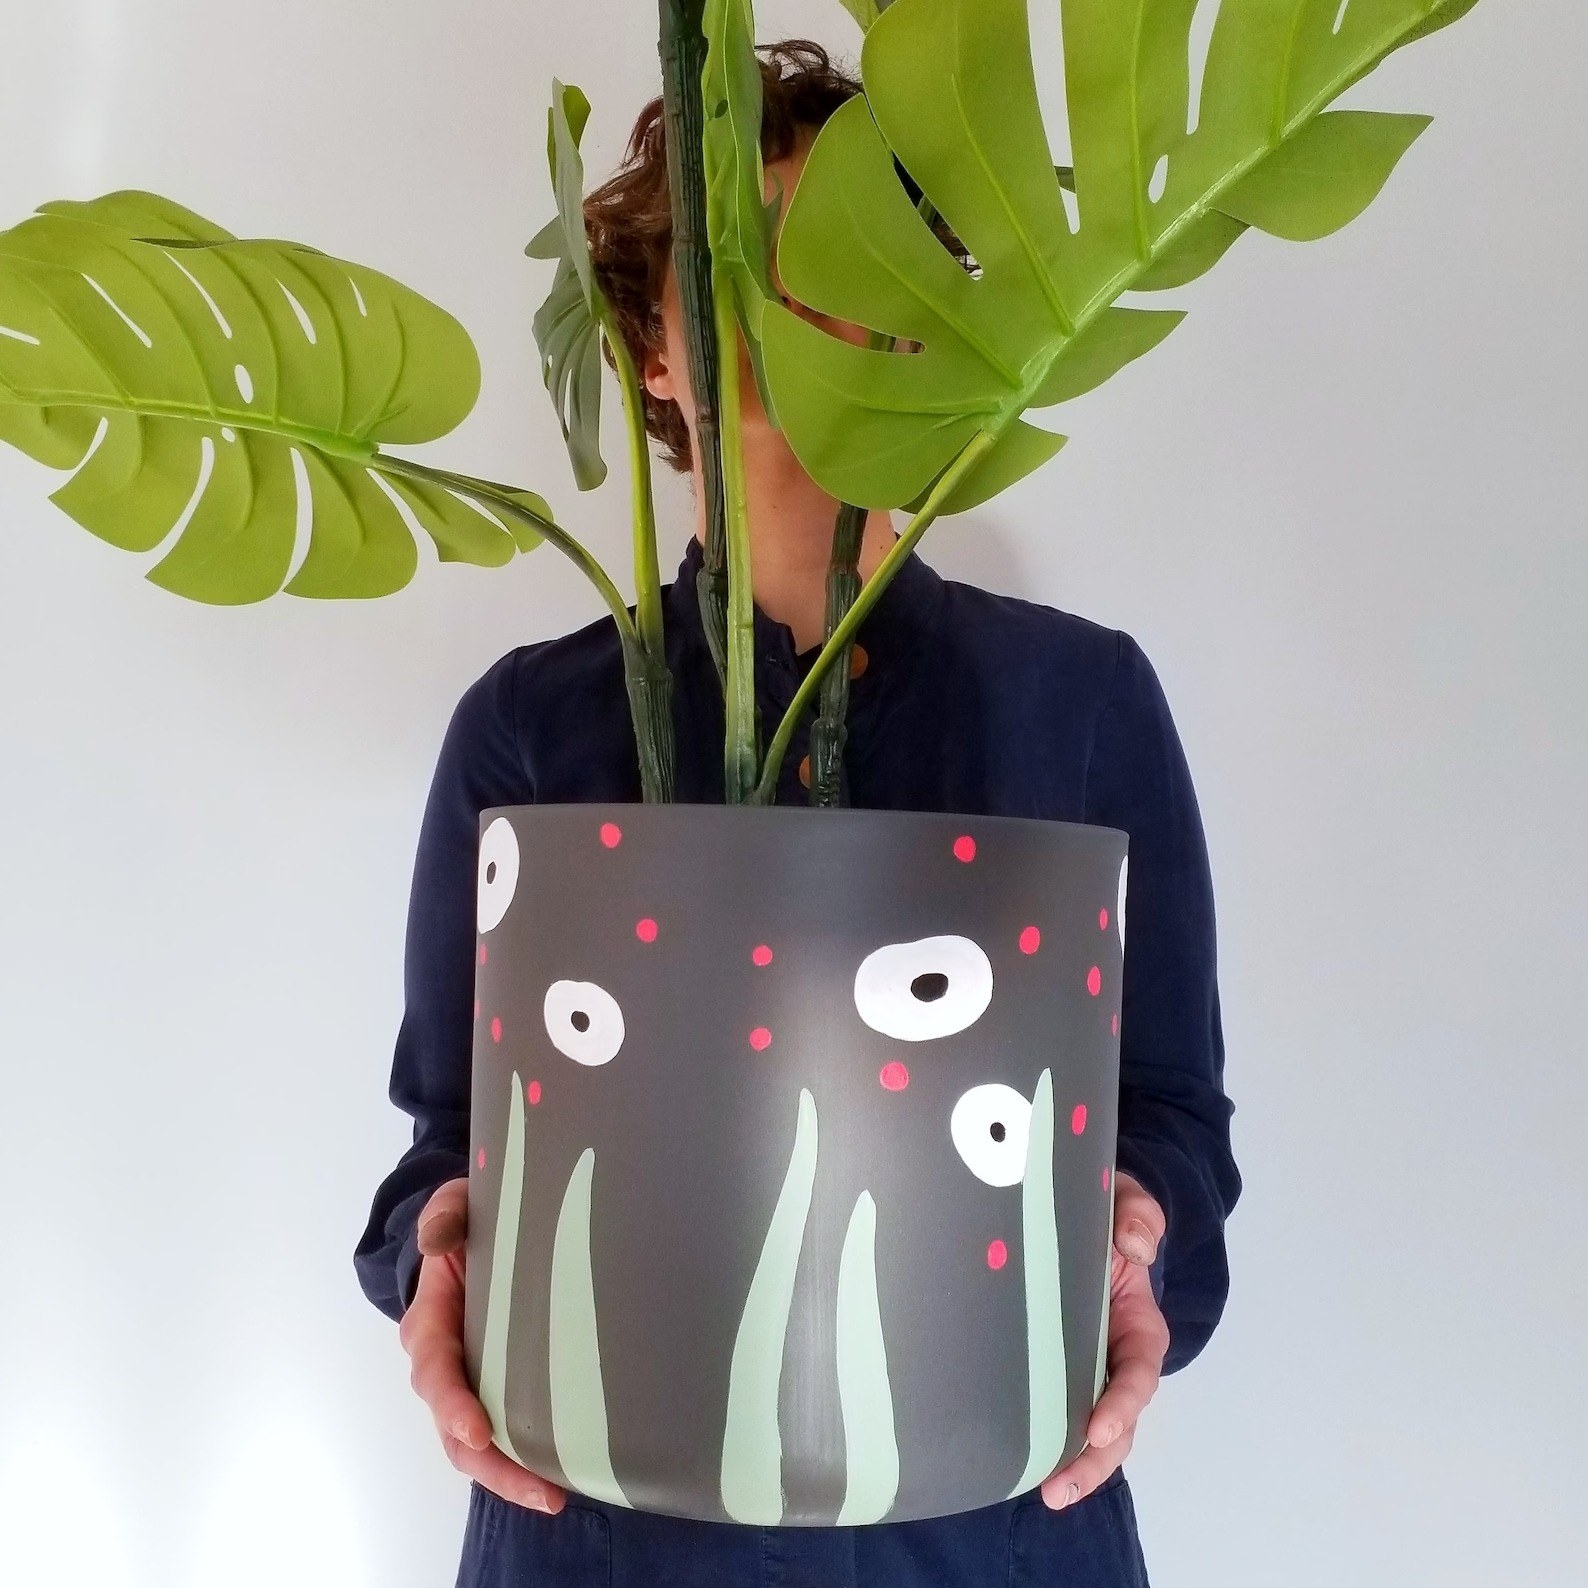 A person holds a planter with a colorful design painted on it